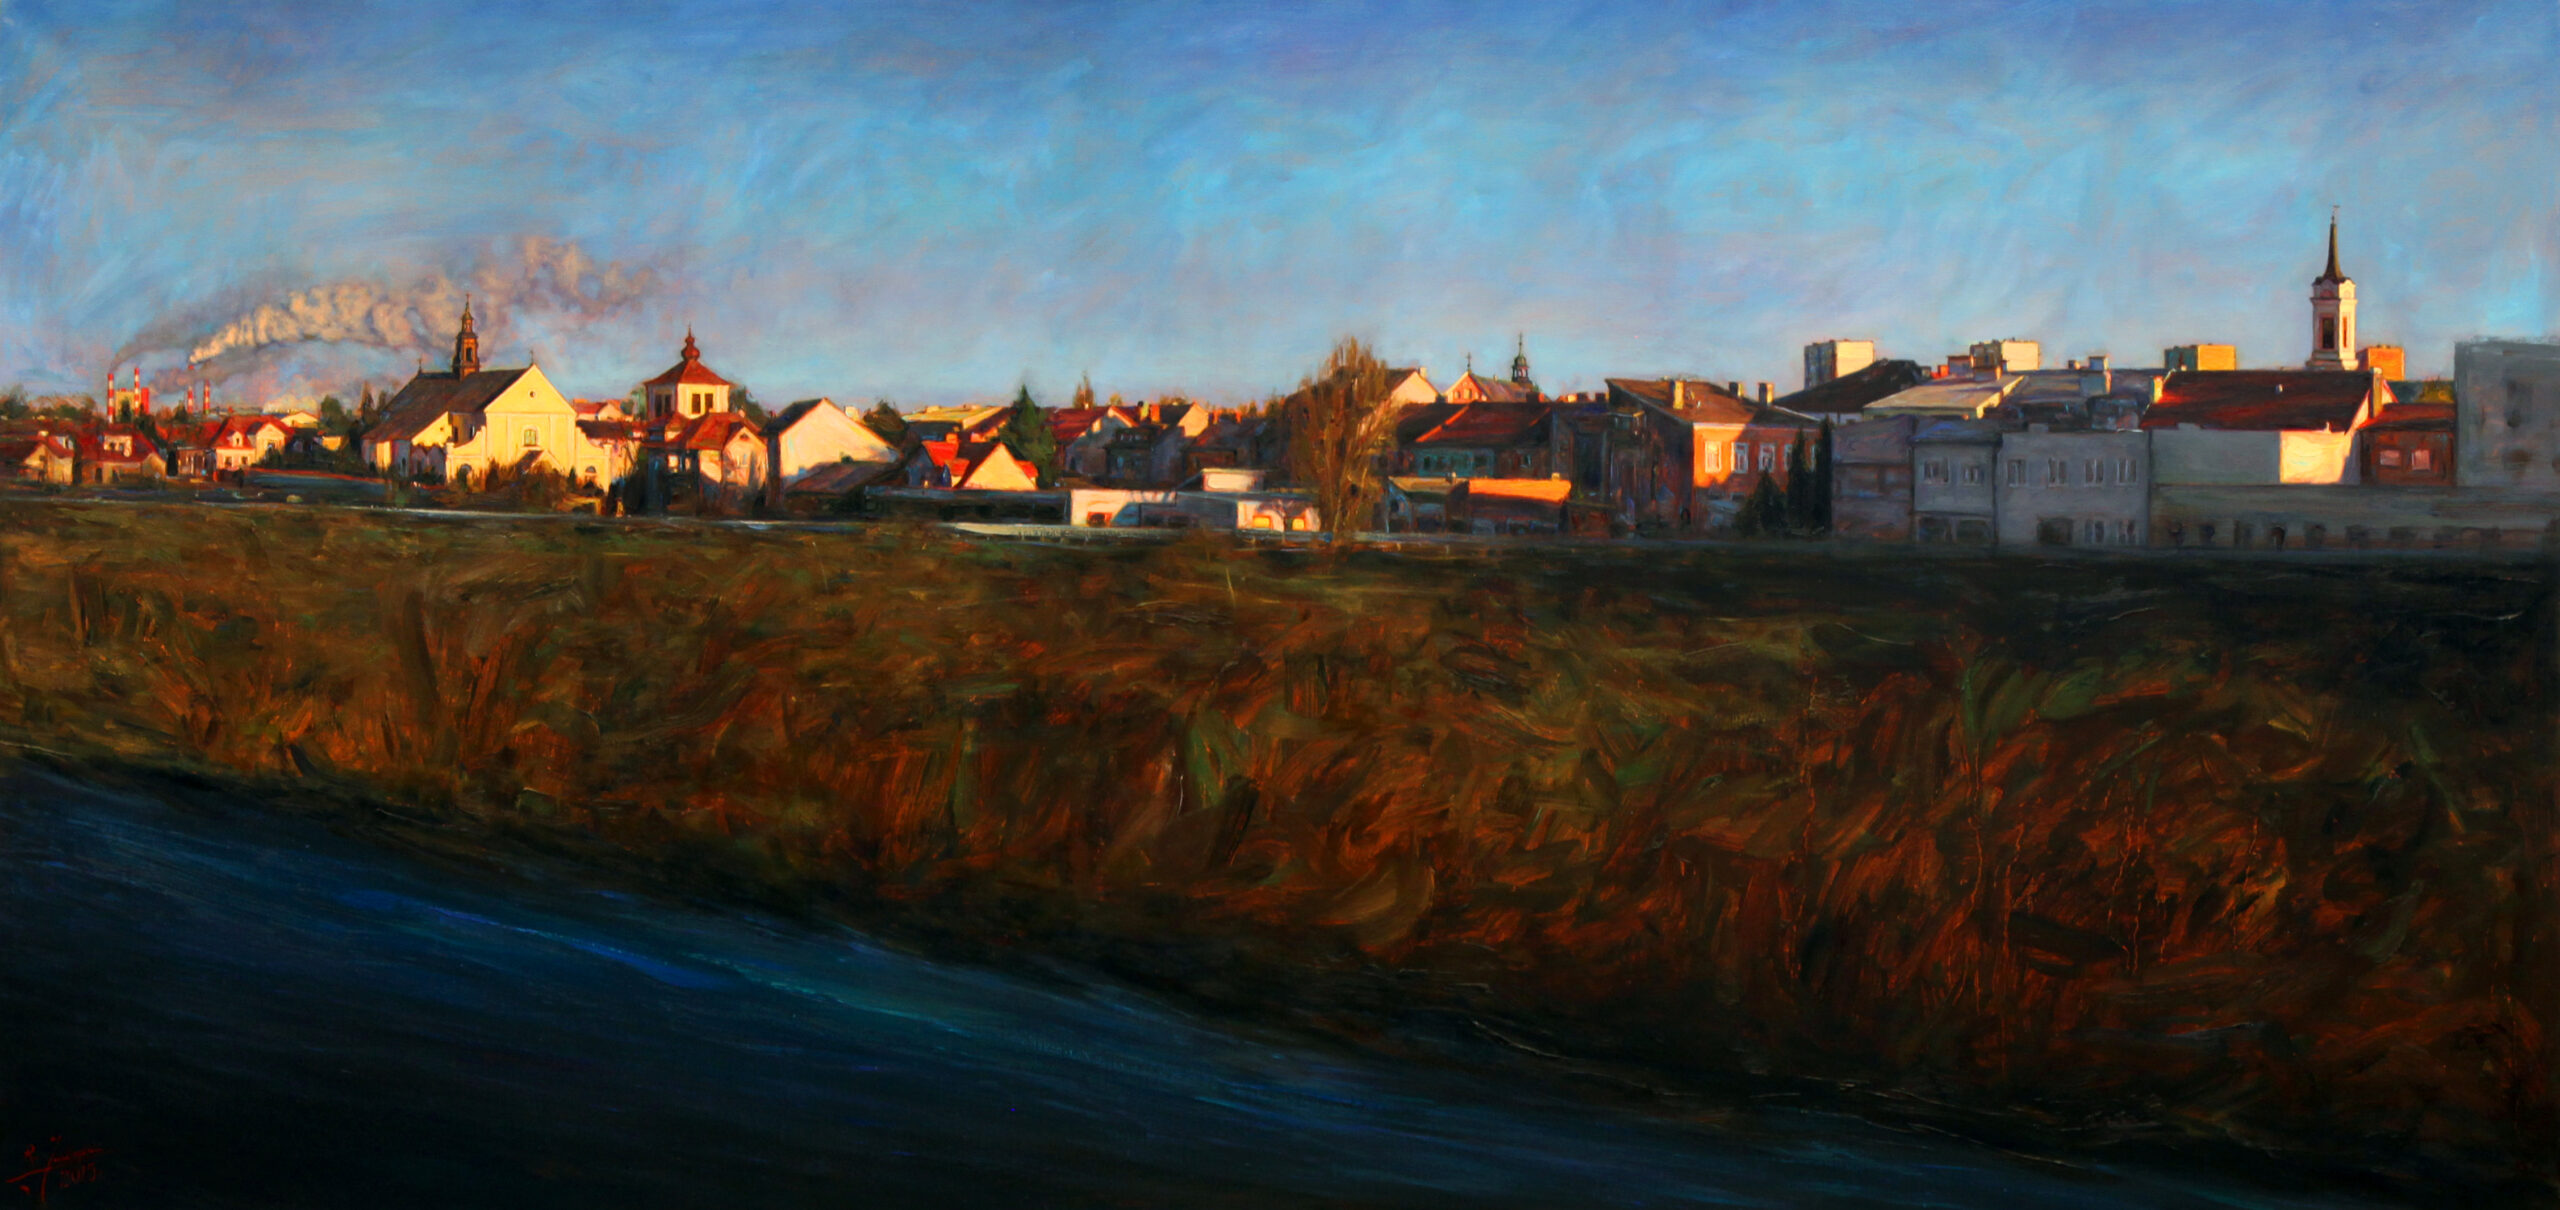 The Panorama of Ostroleka (I), oil on canvas, 90x190cm, 2015